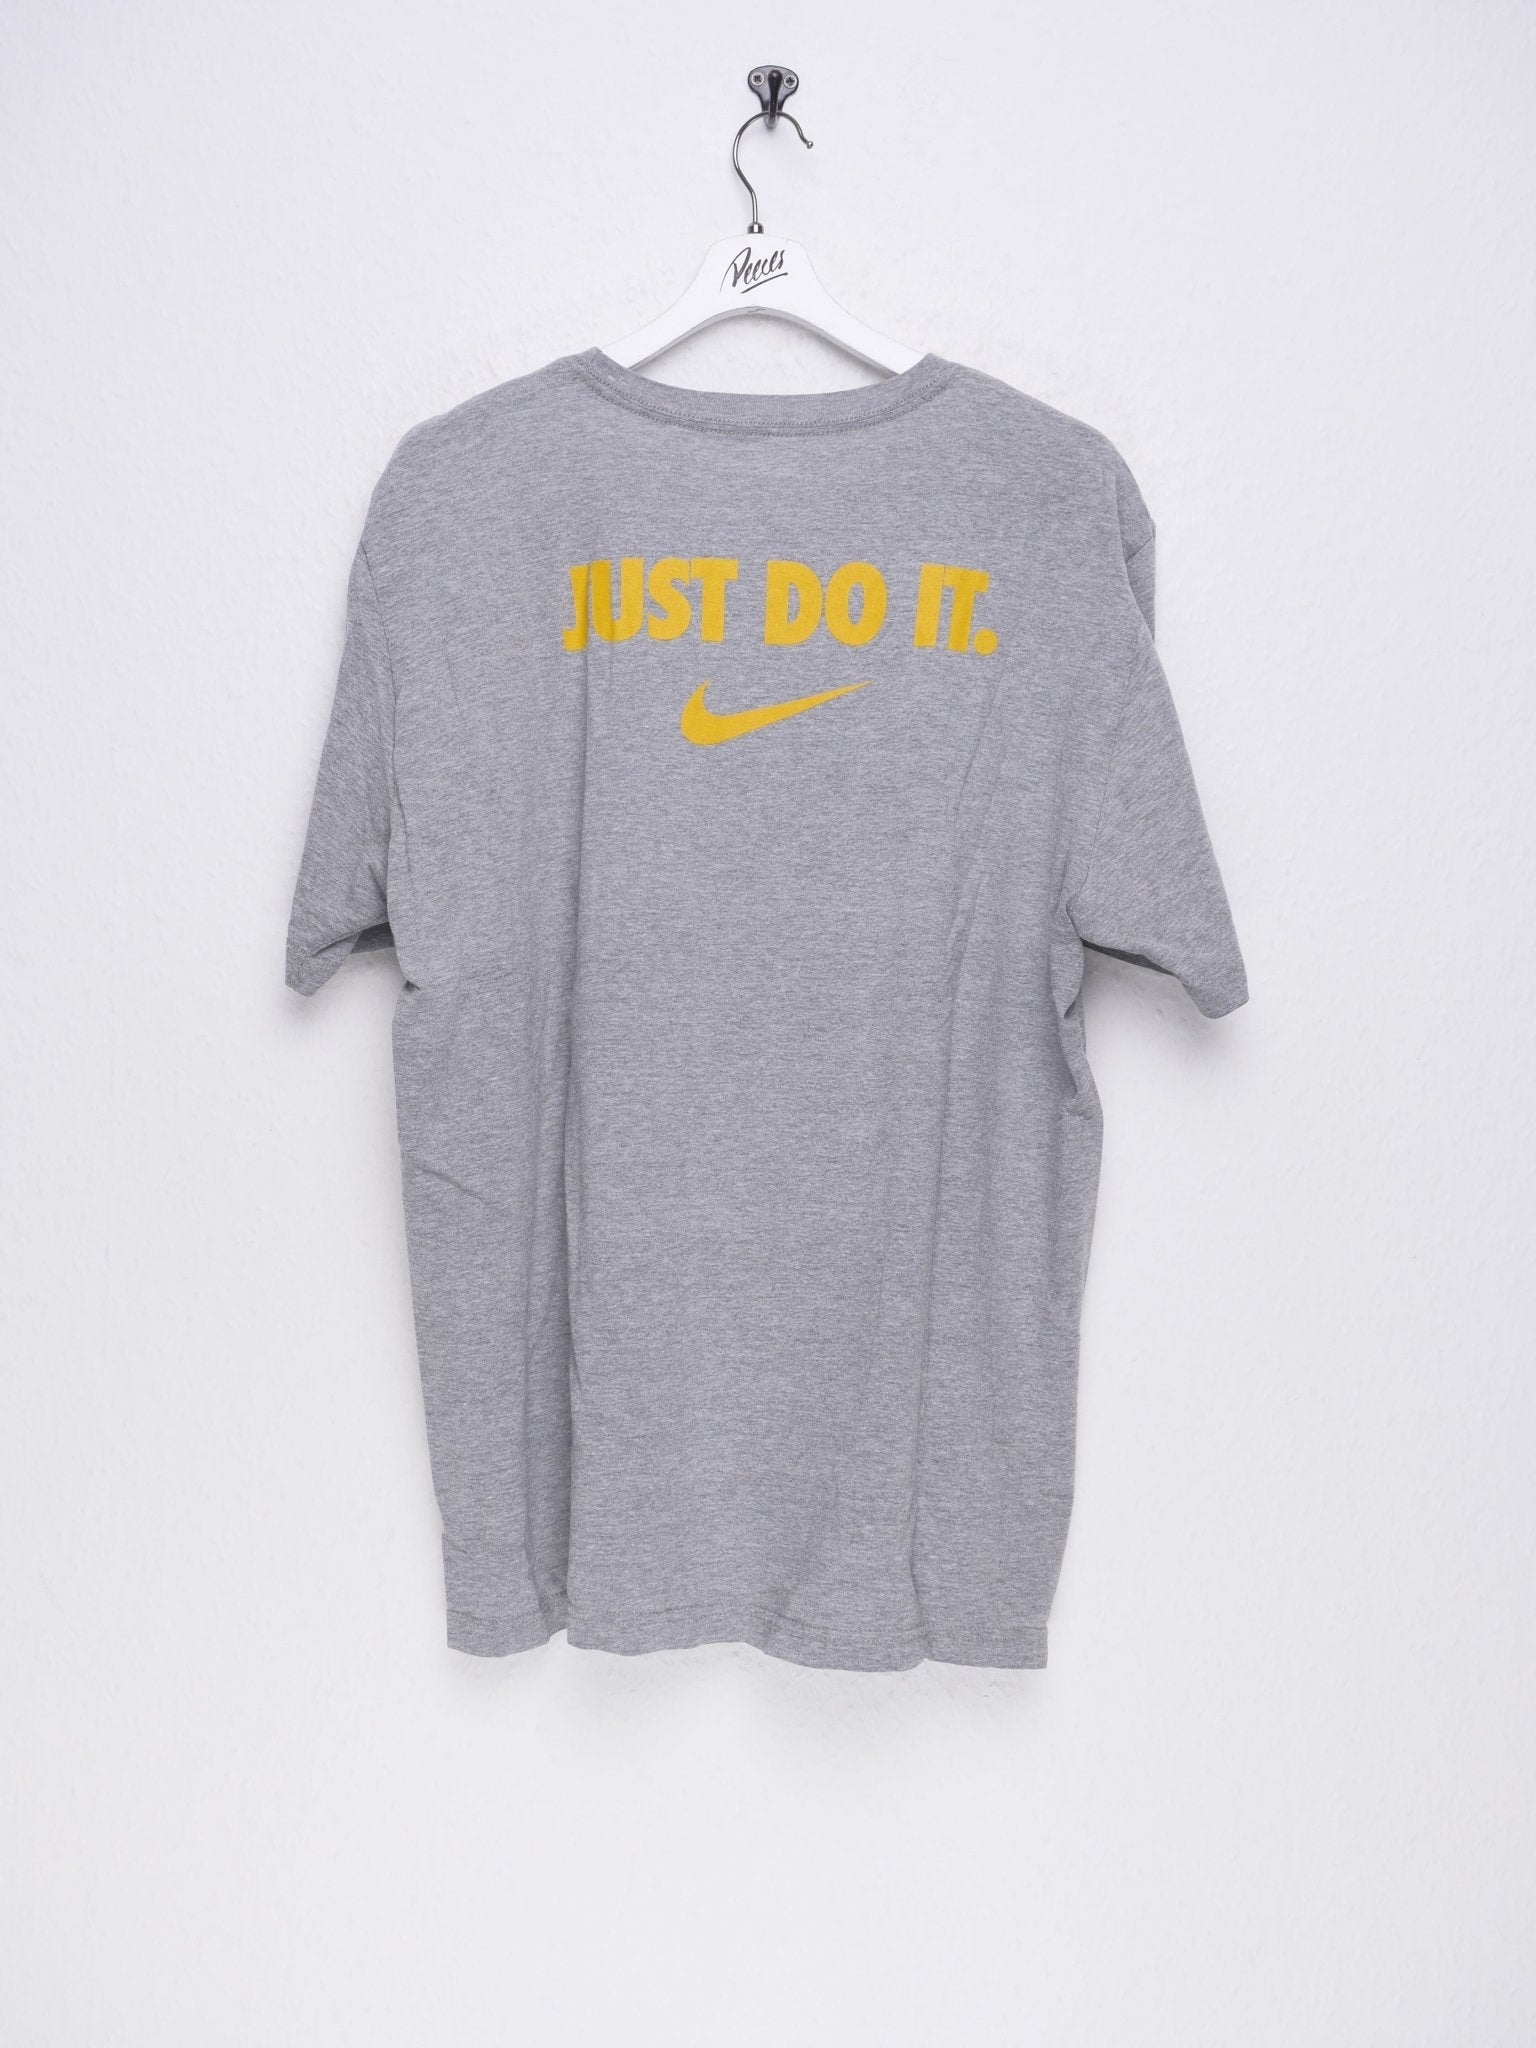 Nike printed Basketball never Stops Spellout Vintage Shirt - Peeces